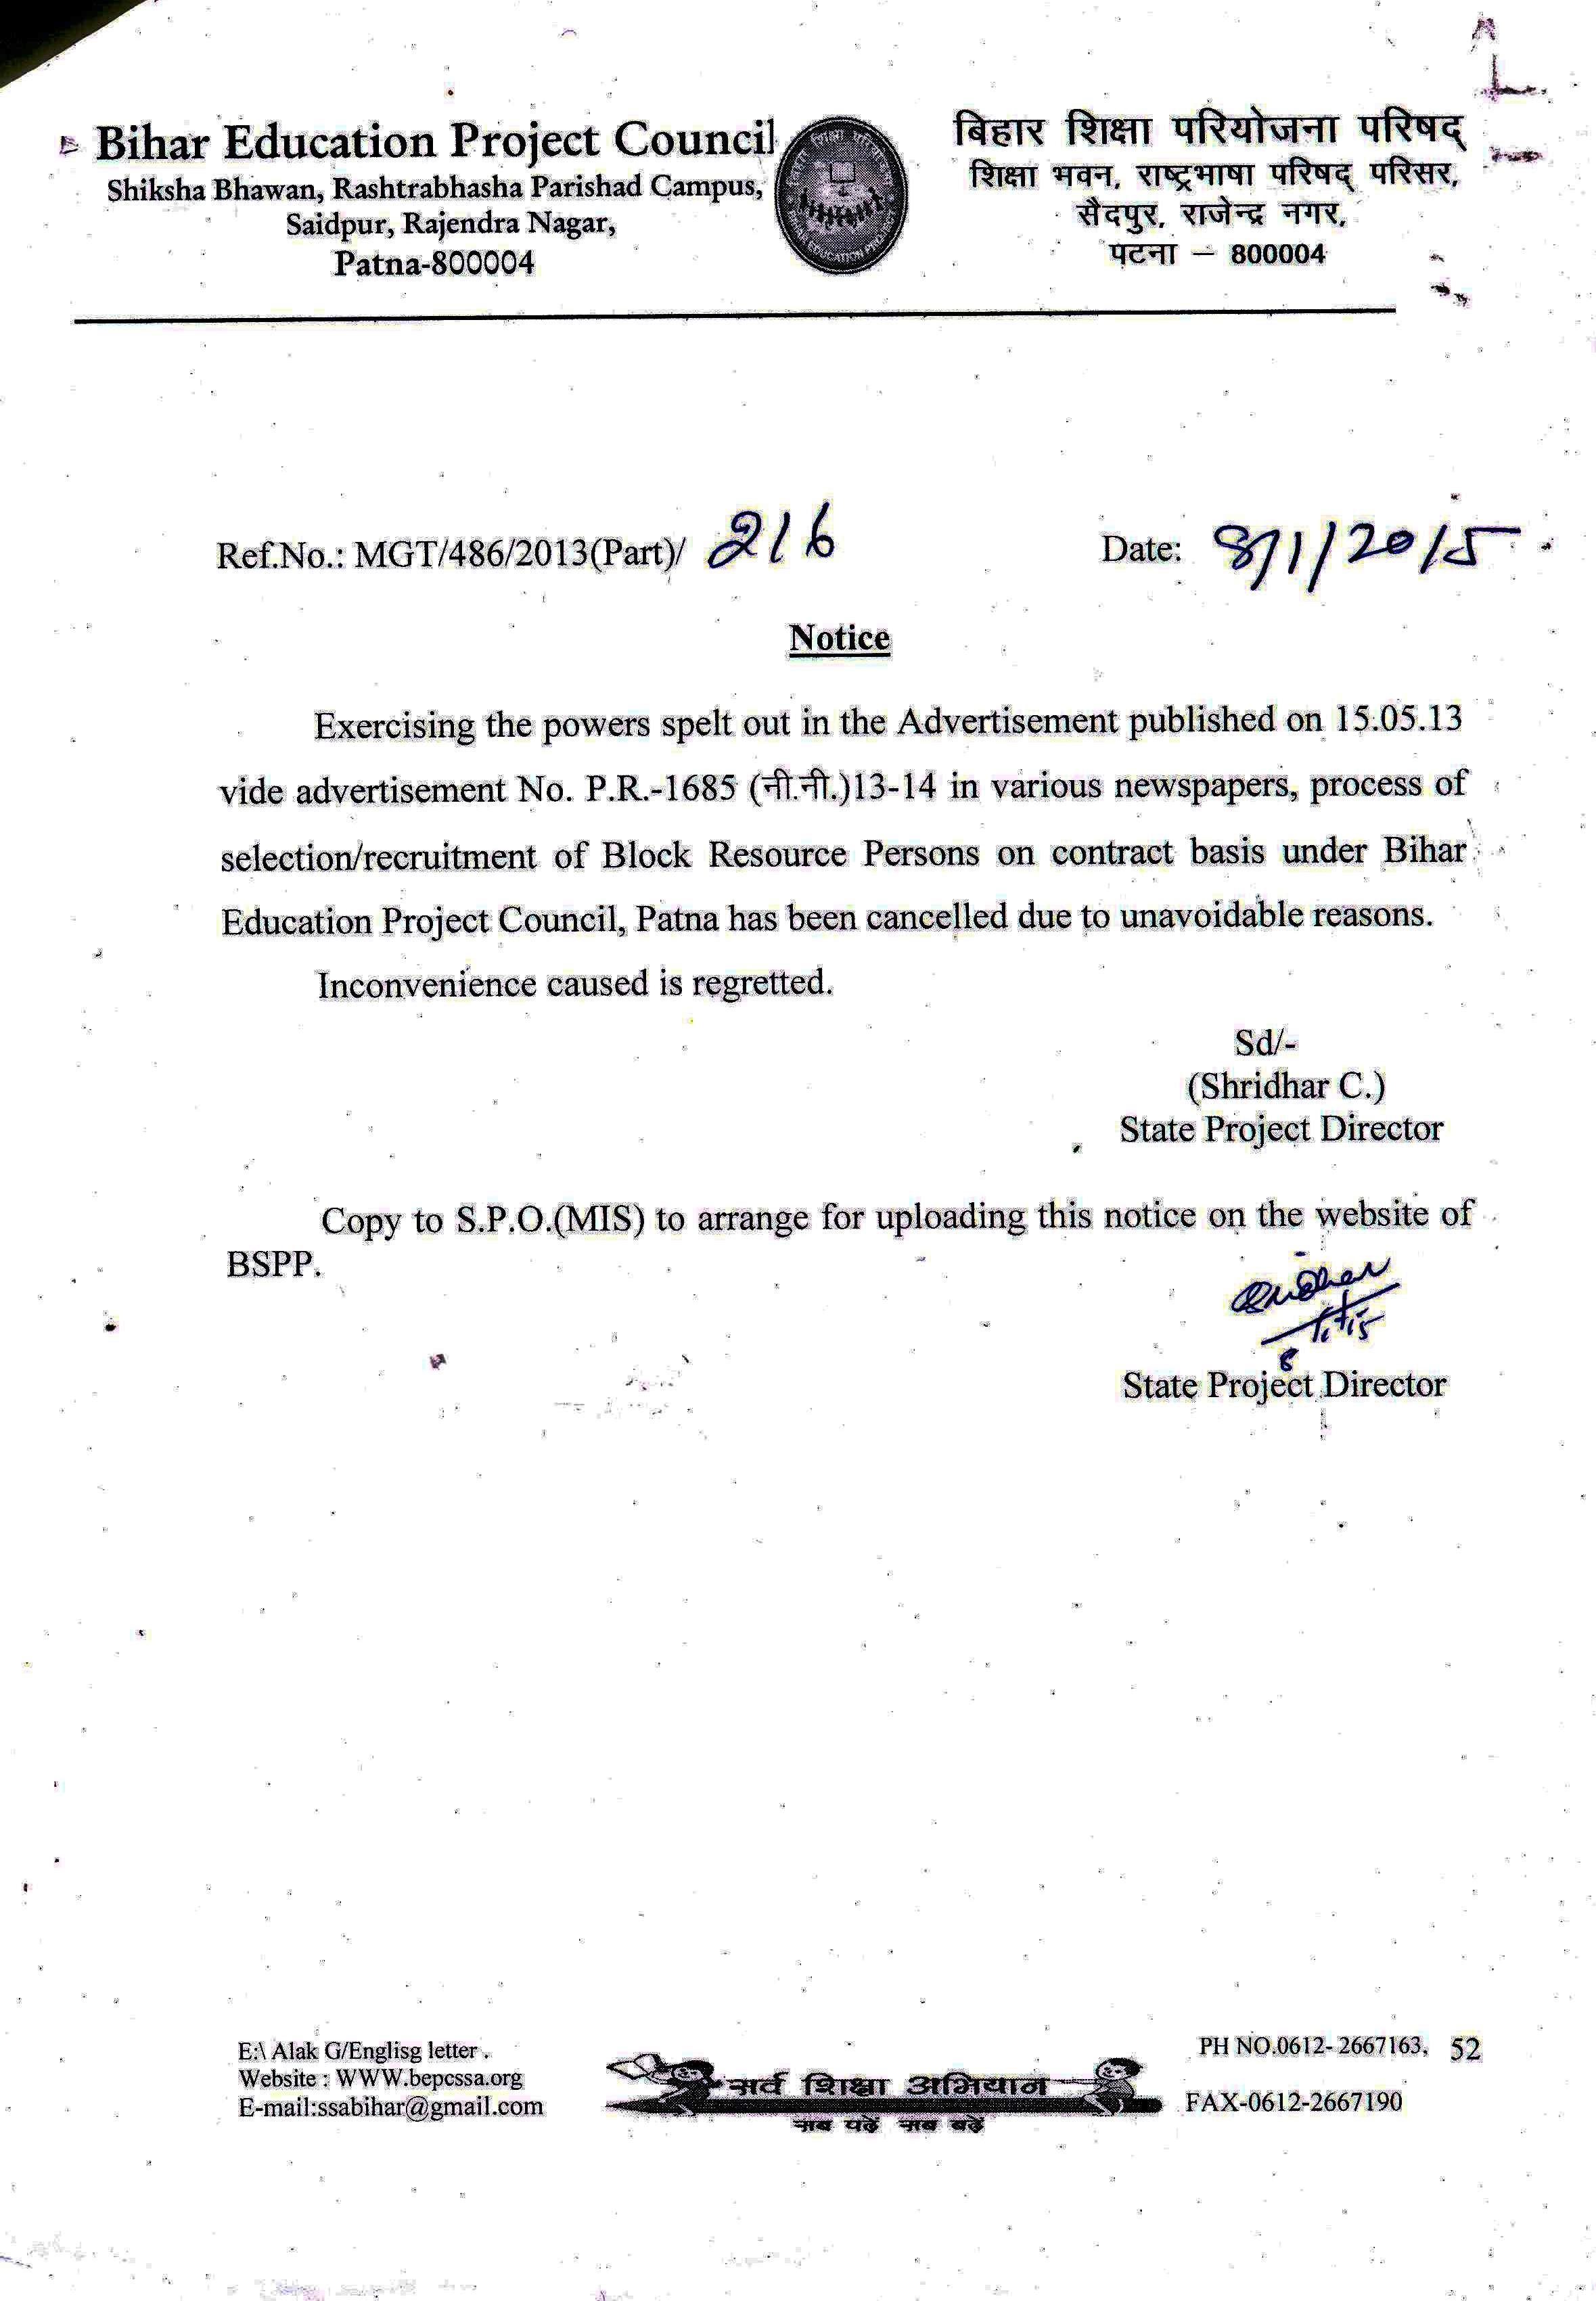 Sample Letter Of Meeting Appointment Regarding On Sports 52